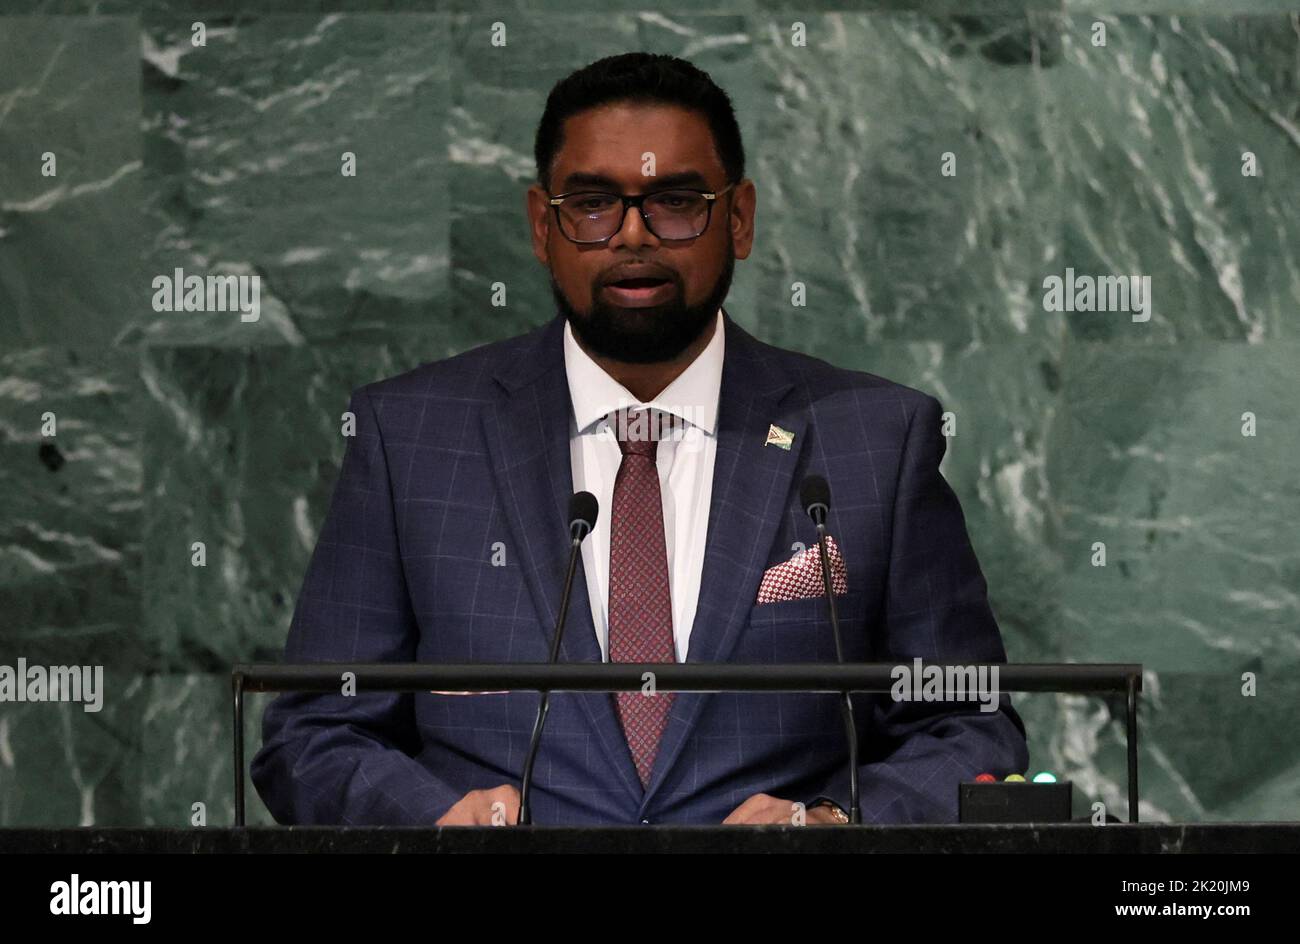 Guyana's President Mohamed Irfaan Ali addresses the 77th Session of the United Nations General Assembly at U.N. Headquarters in New York City, U.S., September 21, 2022. REUTERS/Brendan McDermid Stock Photo